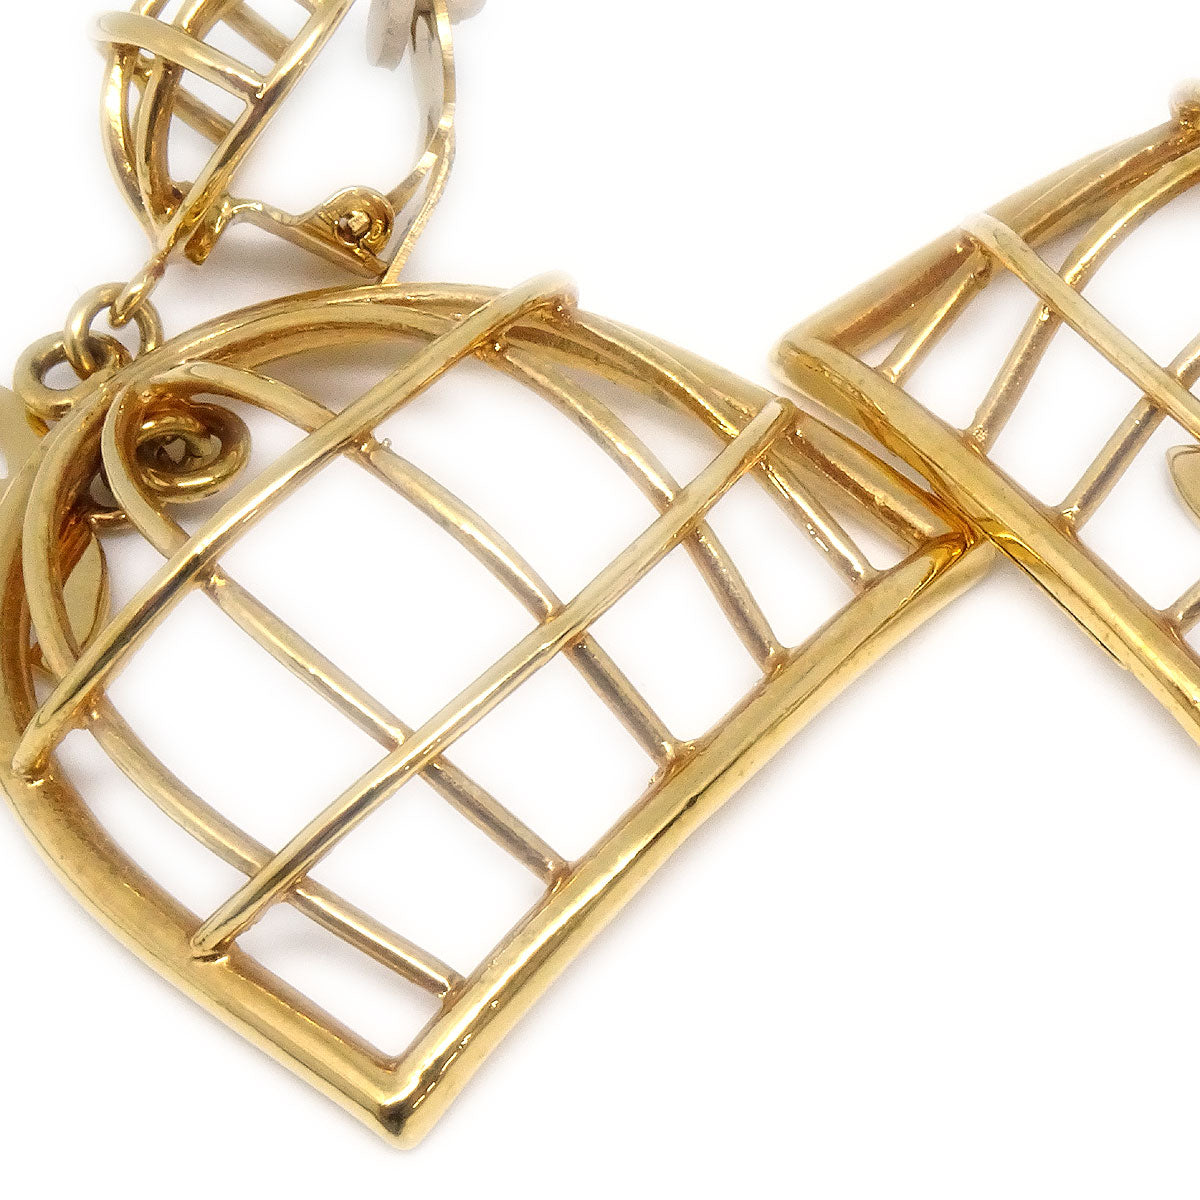 CHANEL Birdcage Earrings Clip-On Gold 93P 27295